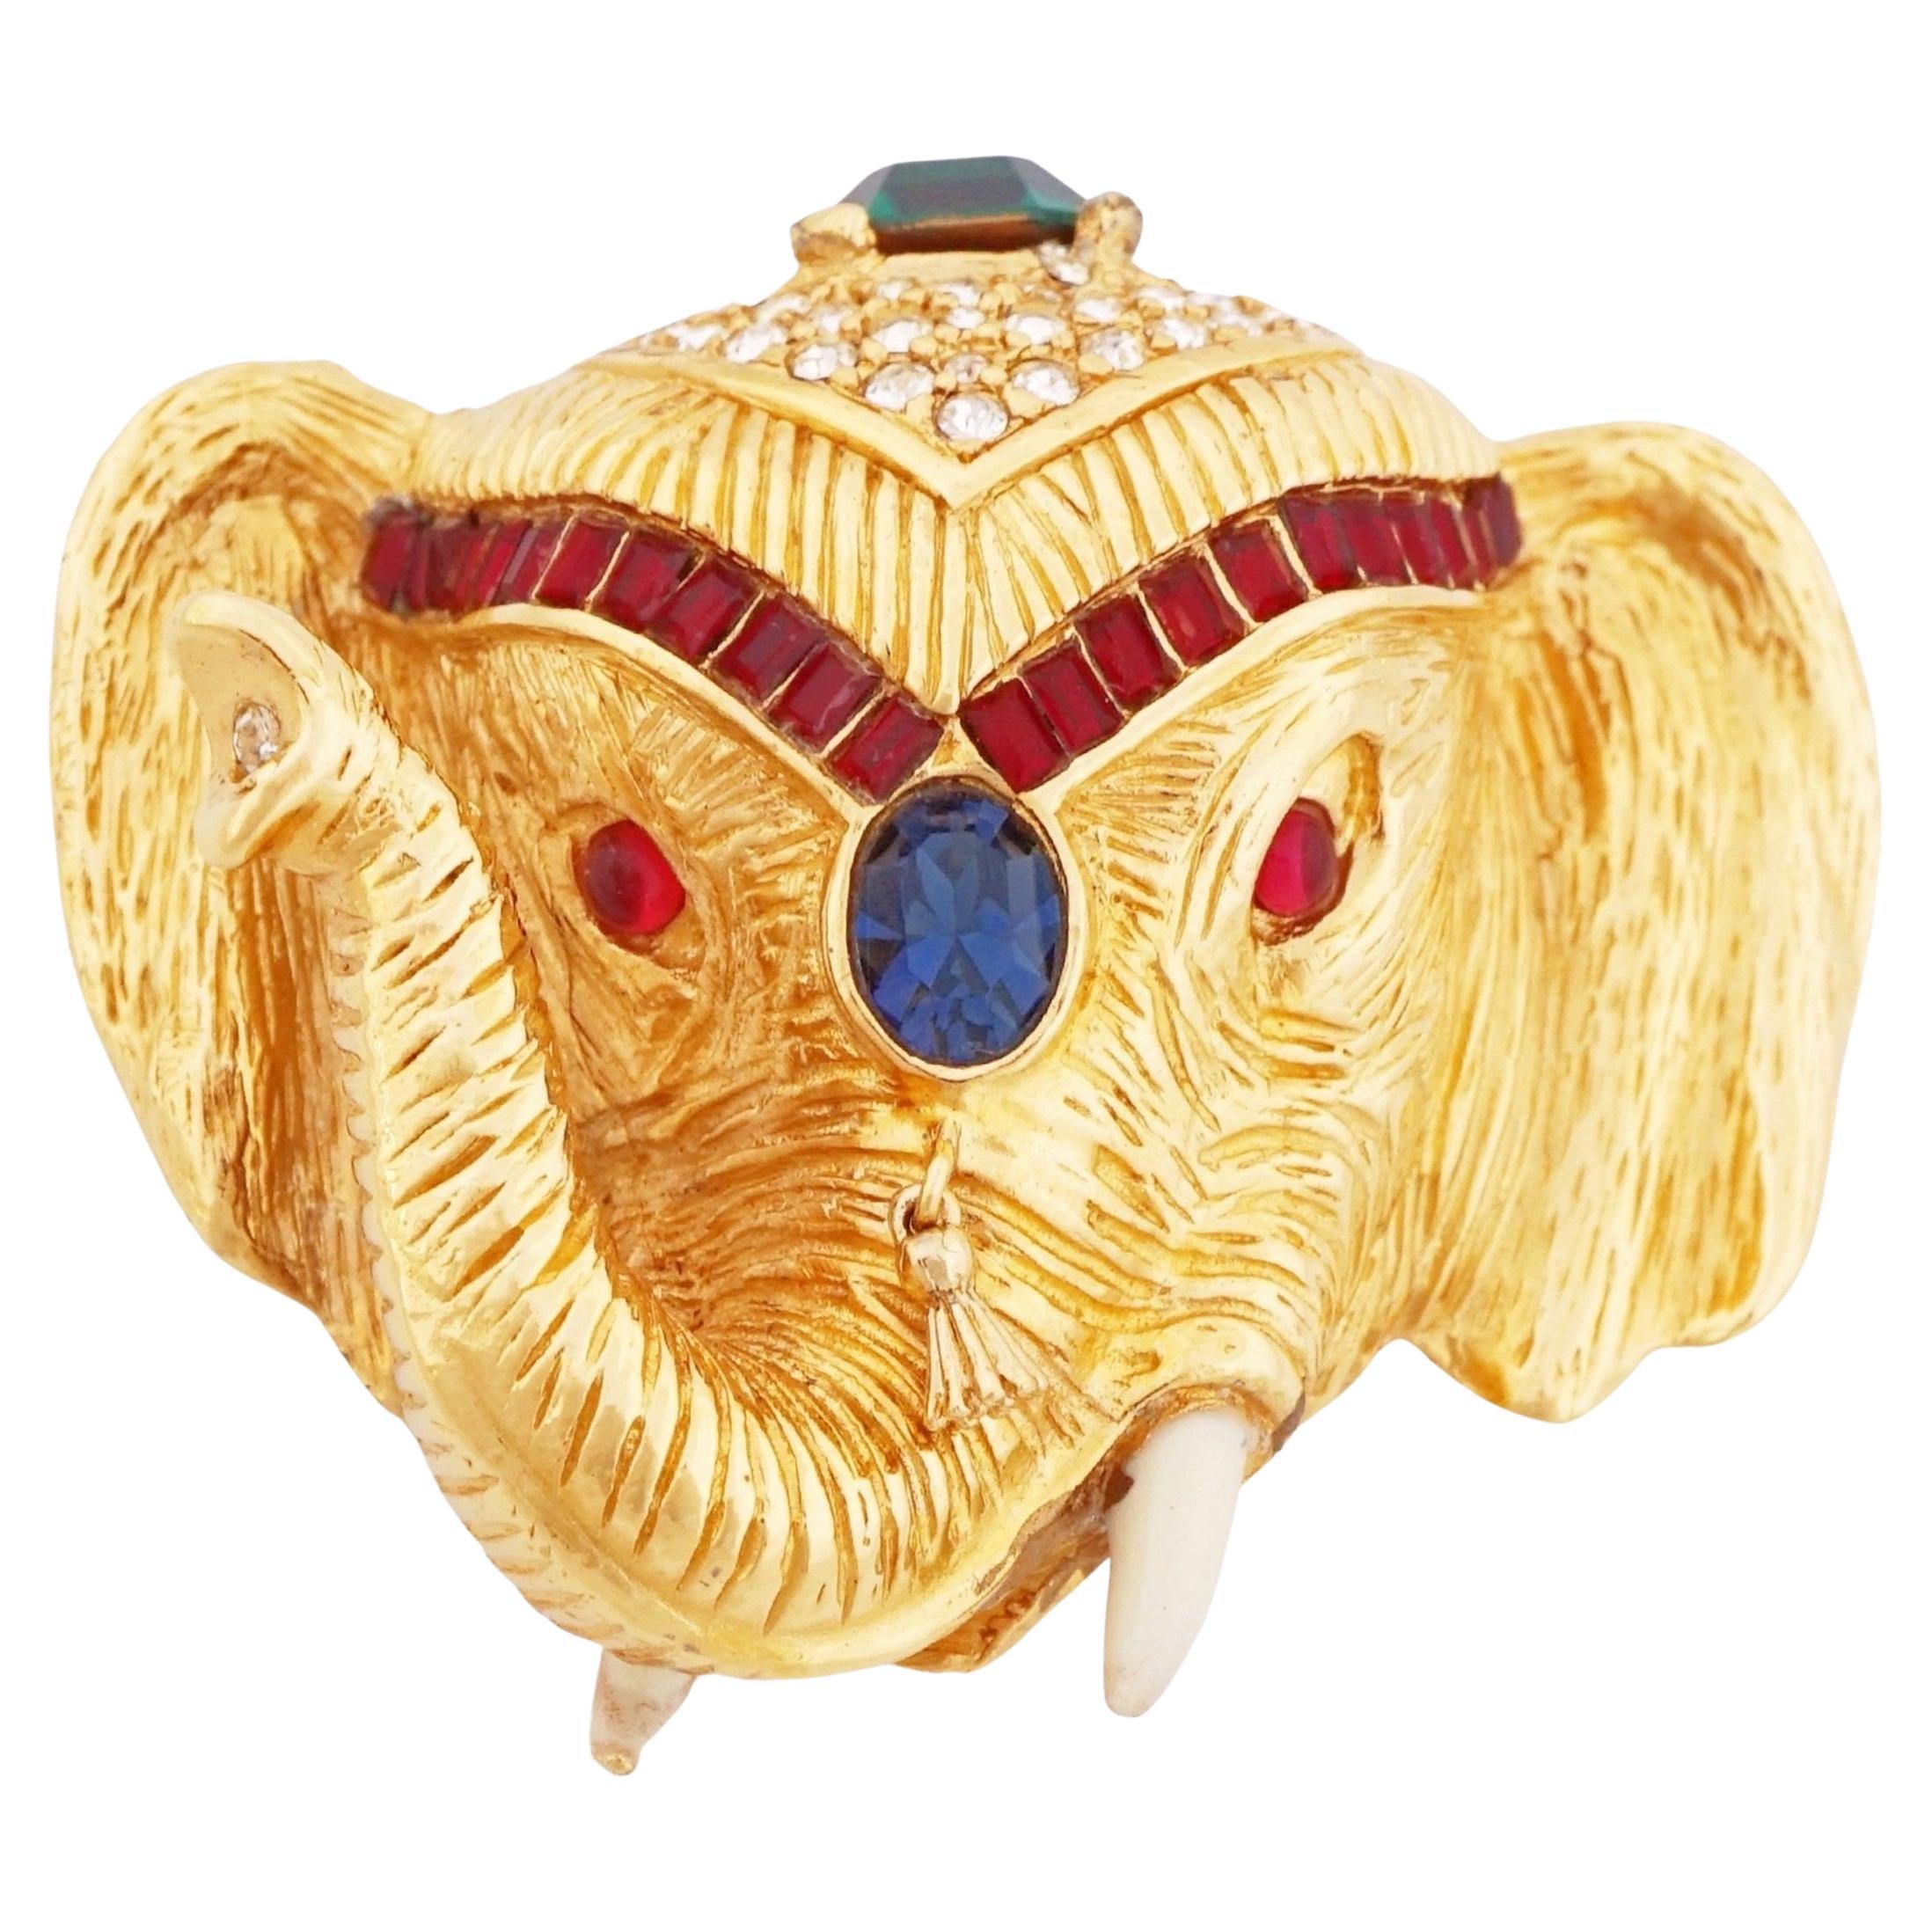 Gilded Elephant Head Brooch With Mughal Jewels By Ciner, 1960s For Sale